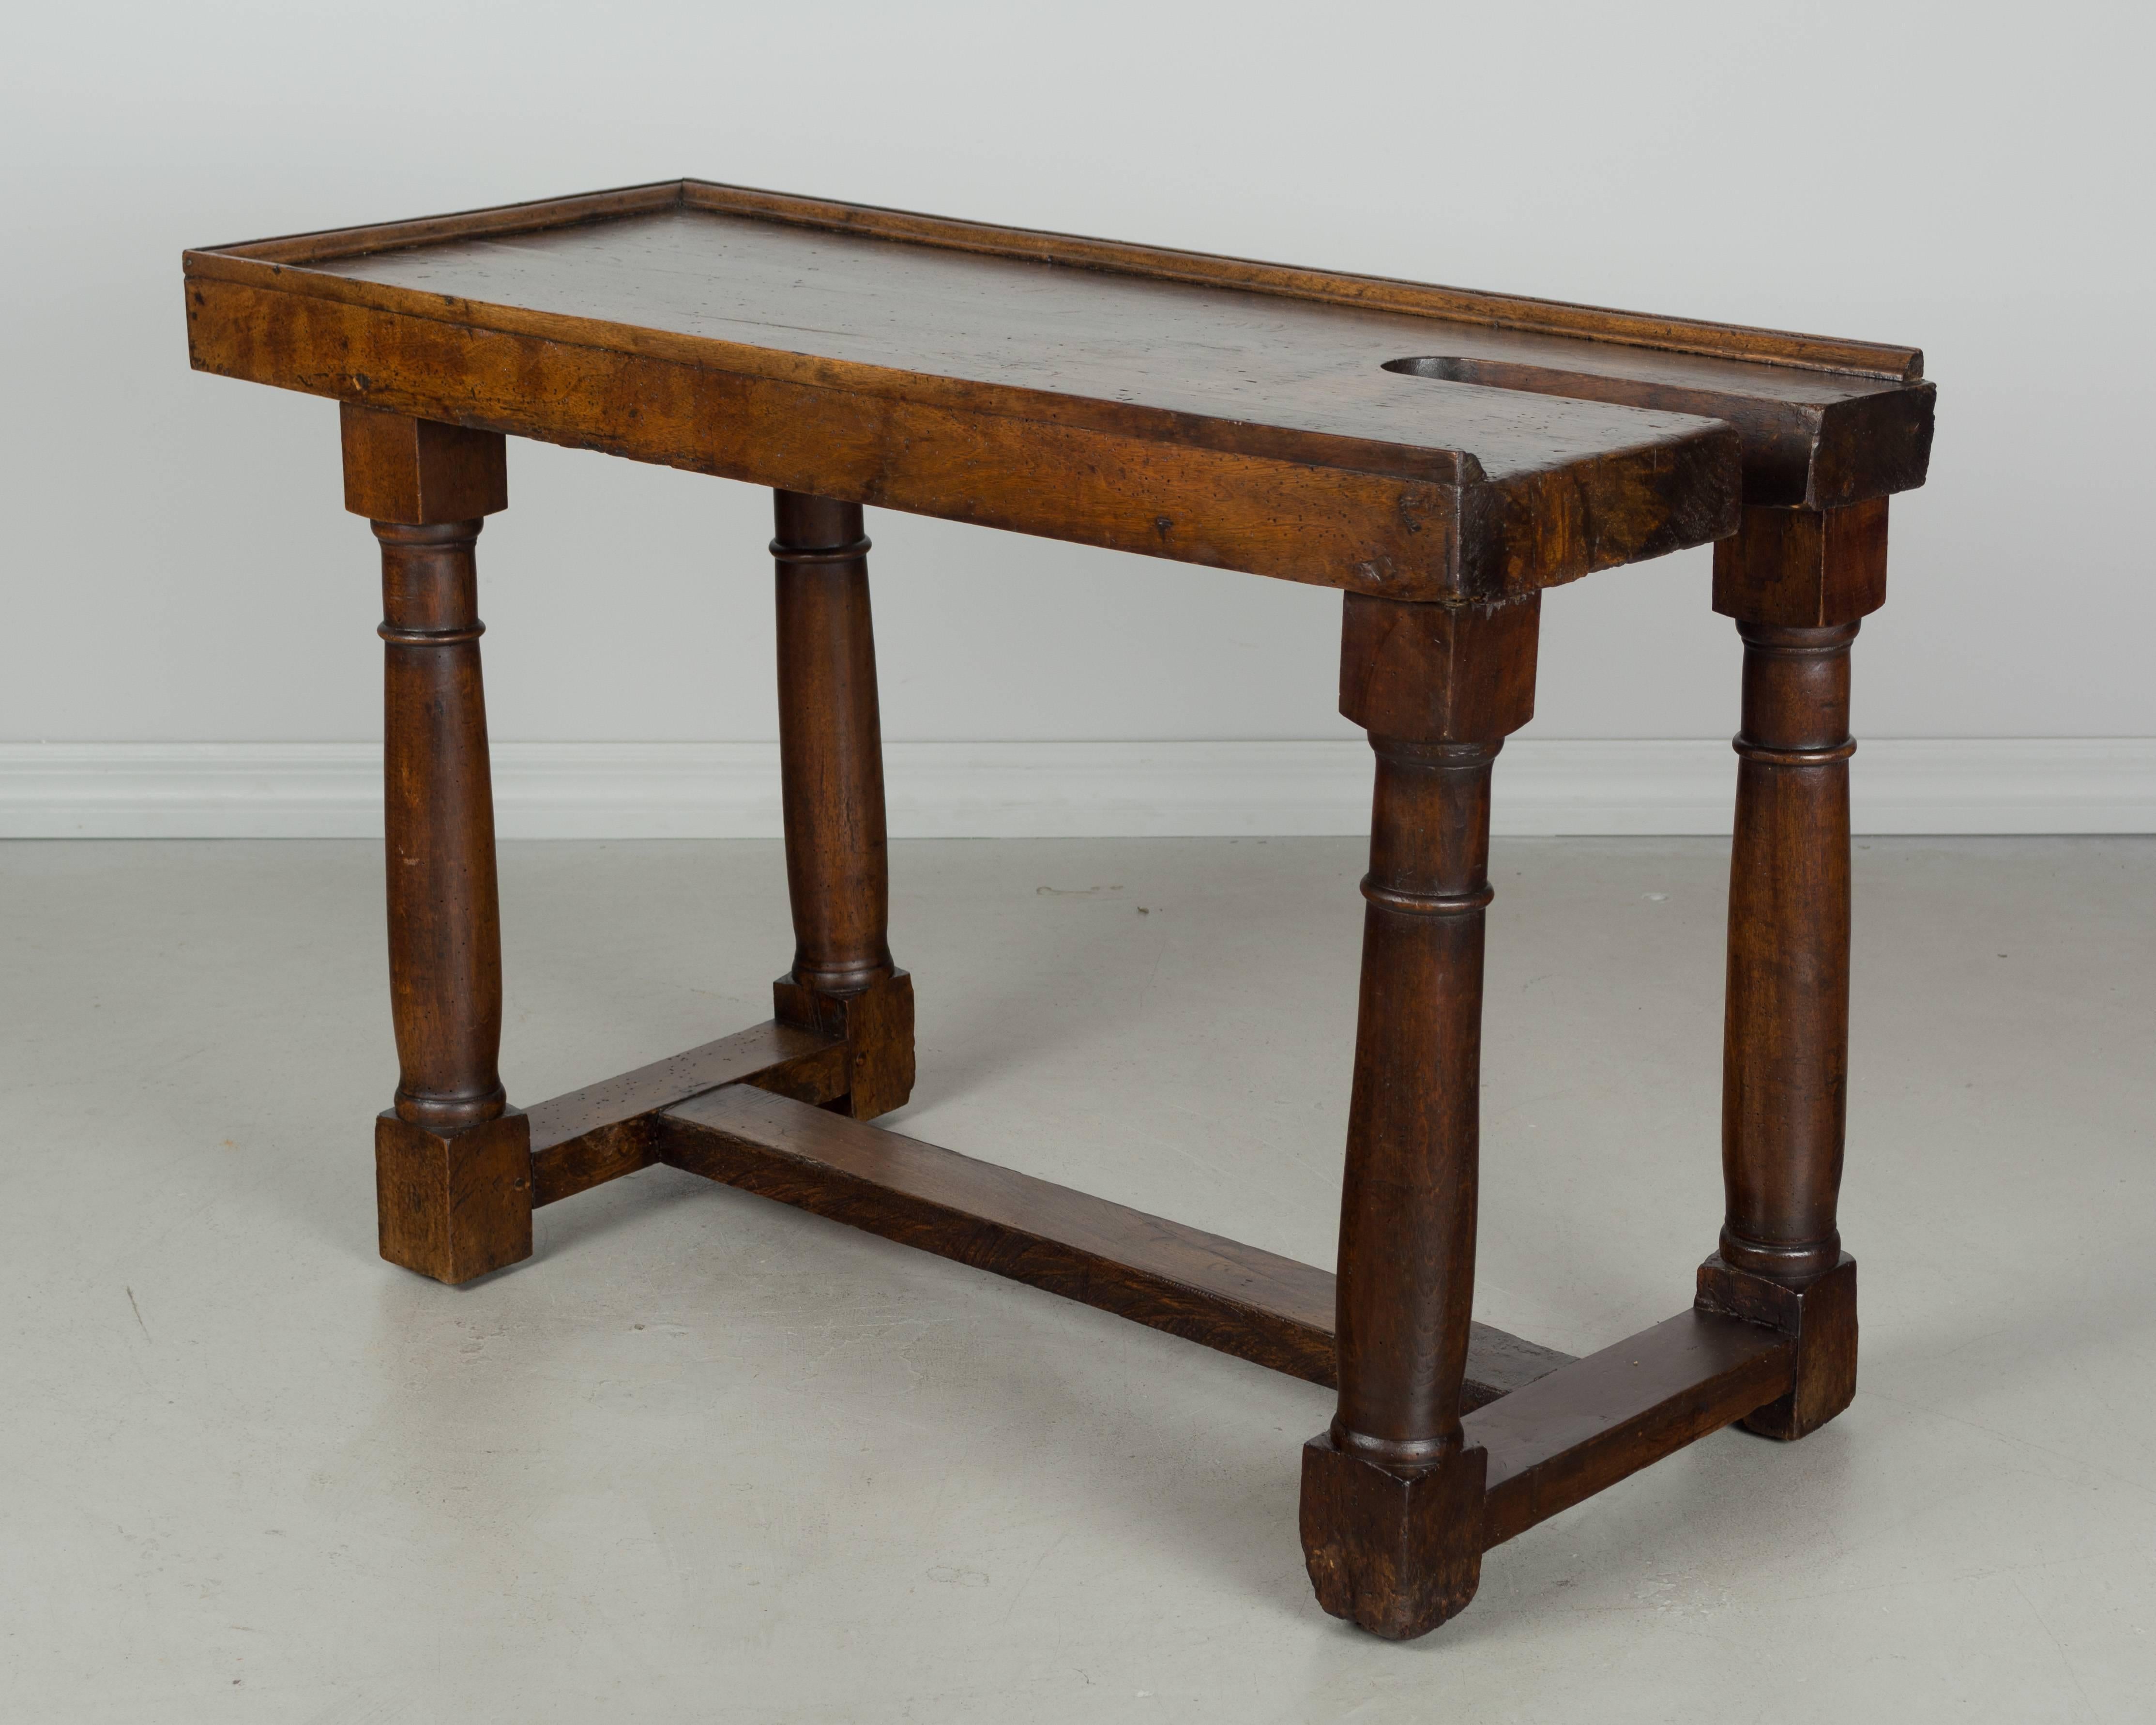 An early 19th century French rustic work table made with a 2-1/2 inch thick solid walnut top. Sturdy base with turned legs and stretcher. Beautiful old patina with waxed finish. 
More photos available upon request. We have a large selection of